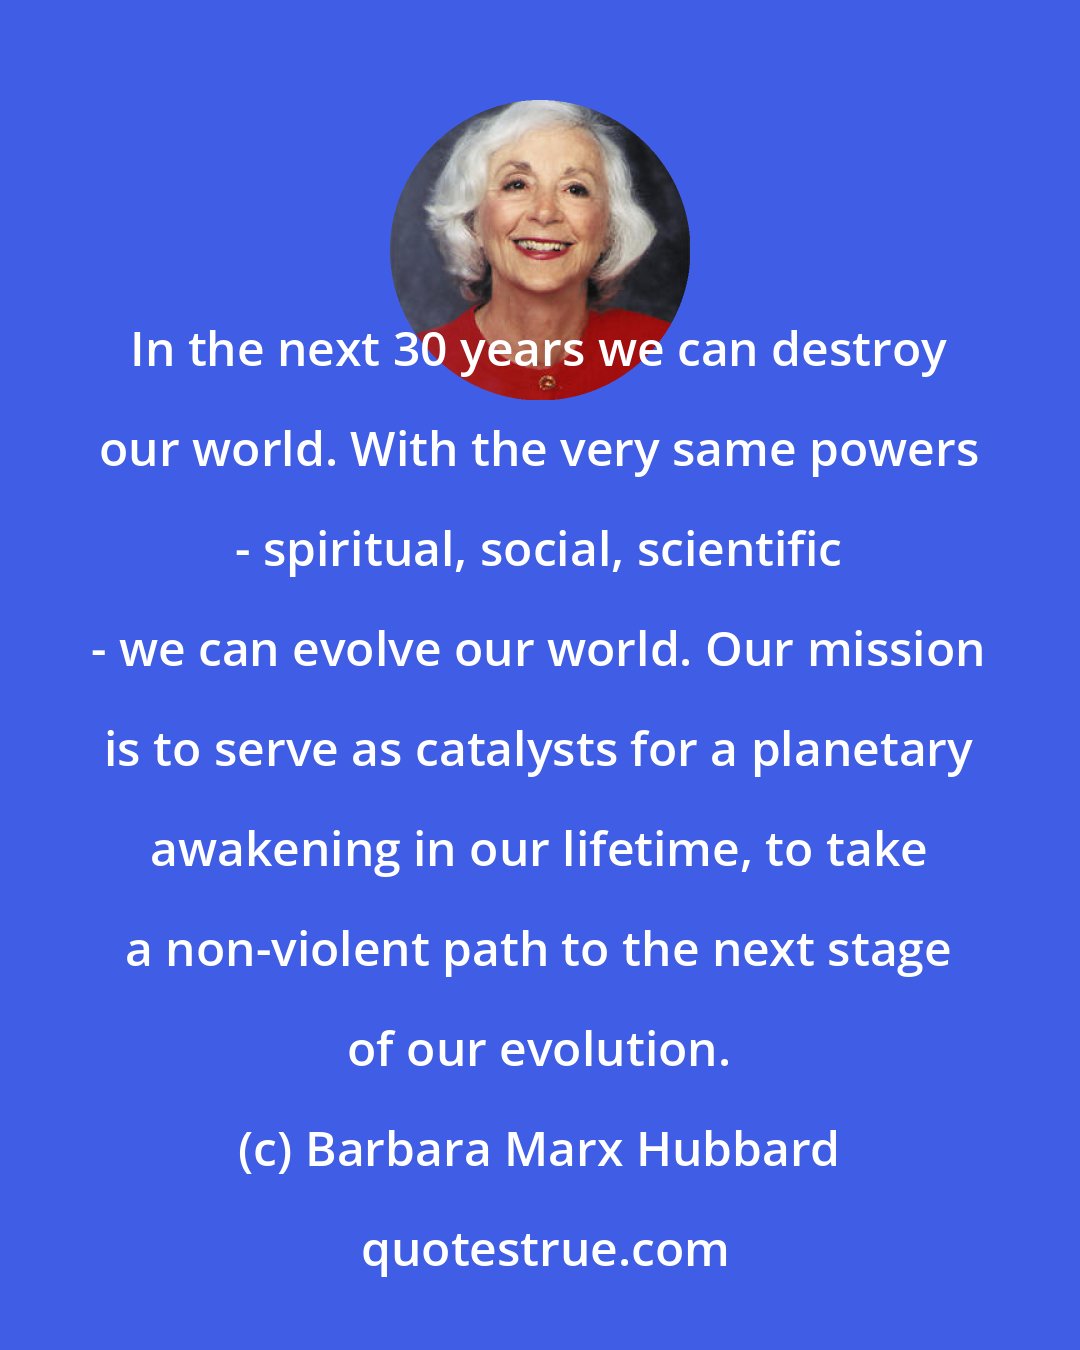 Barbara Marx Hubbard: In the next 30 years we can destroy our world. With the very same powers - spiritual, social, scientific - we can evolve our world. Our mission is to serve as catalysts for a planetary awakening in our lifetime, to take a non-violent path to the next stage of our evolution.